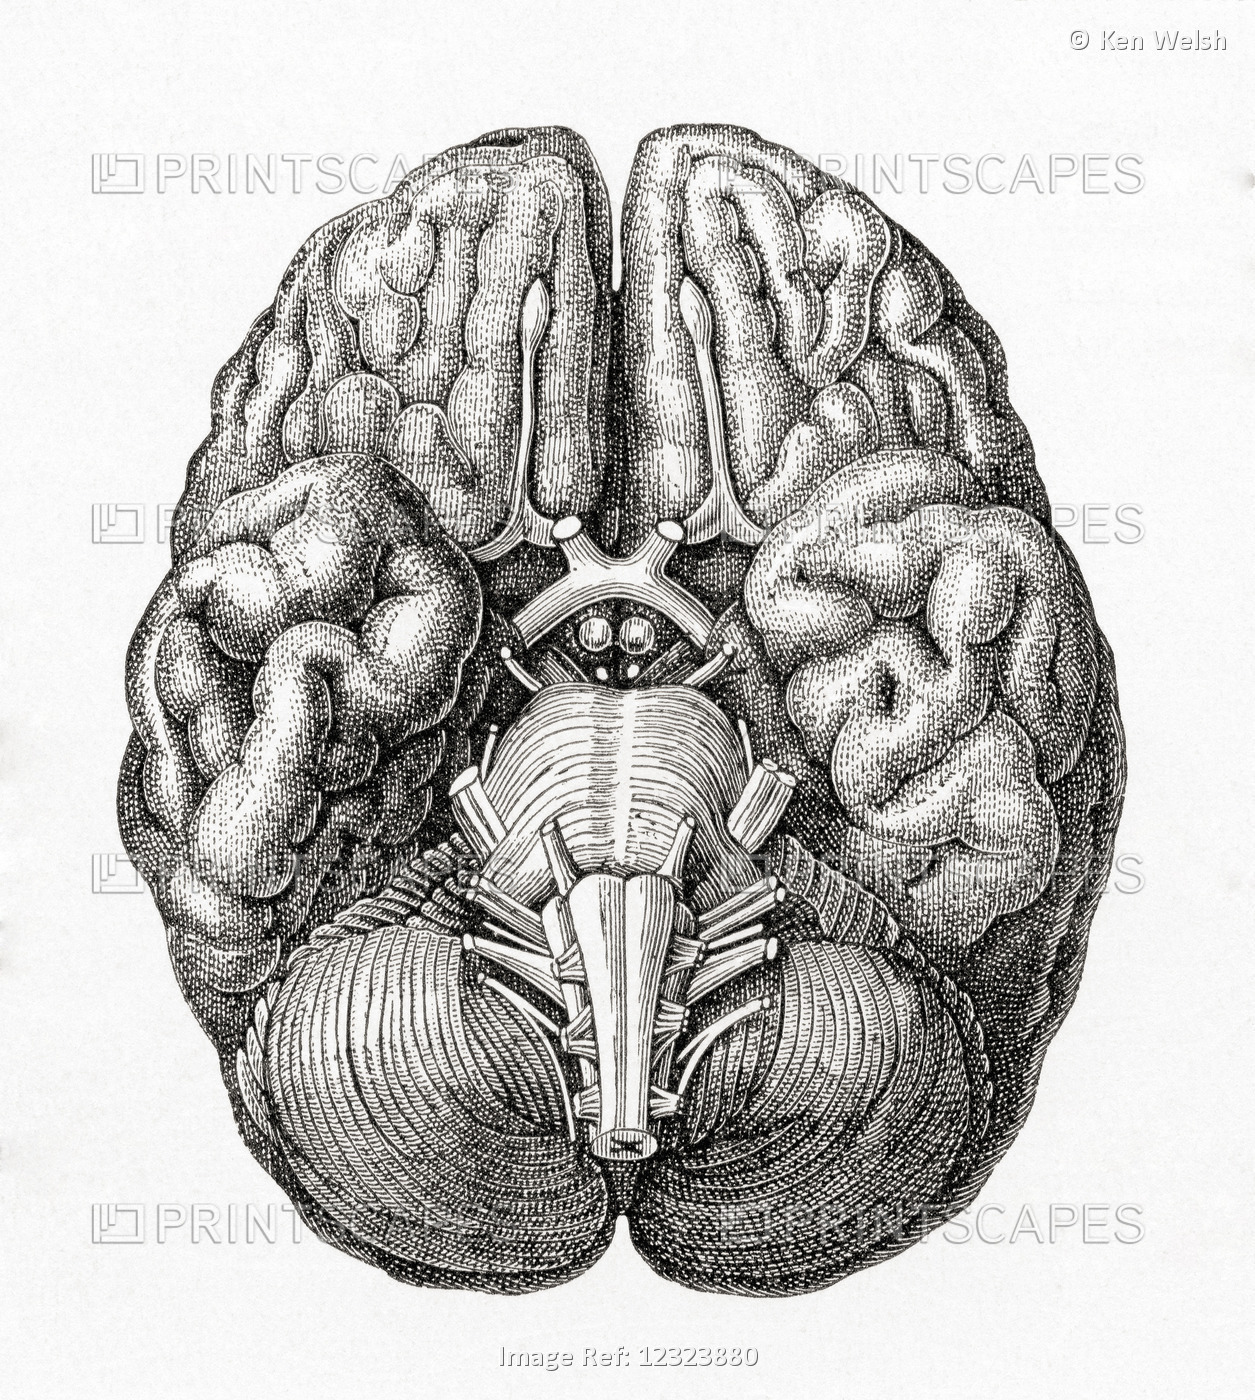 Diagram Of The Human Cerebellum Seen From Below. From Meyers Lexicon, Published ...